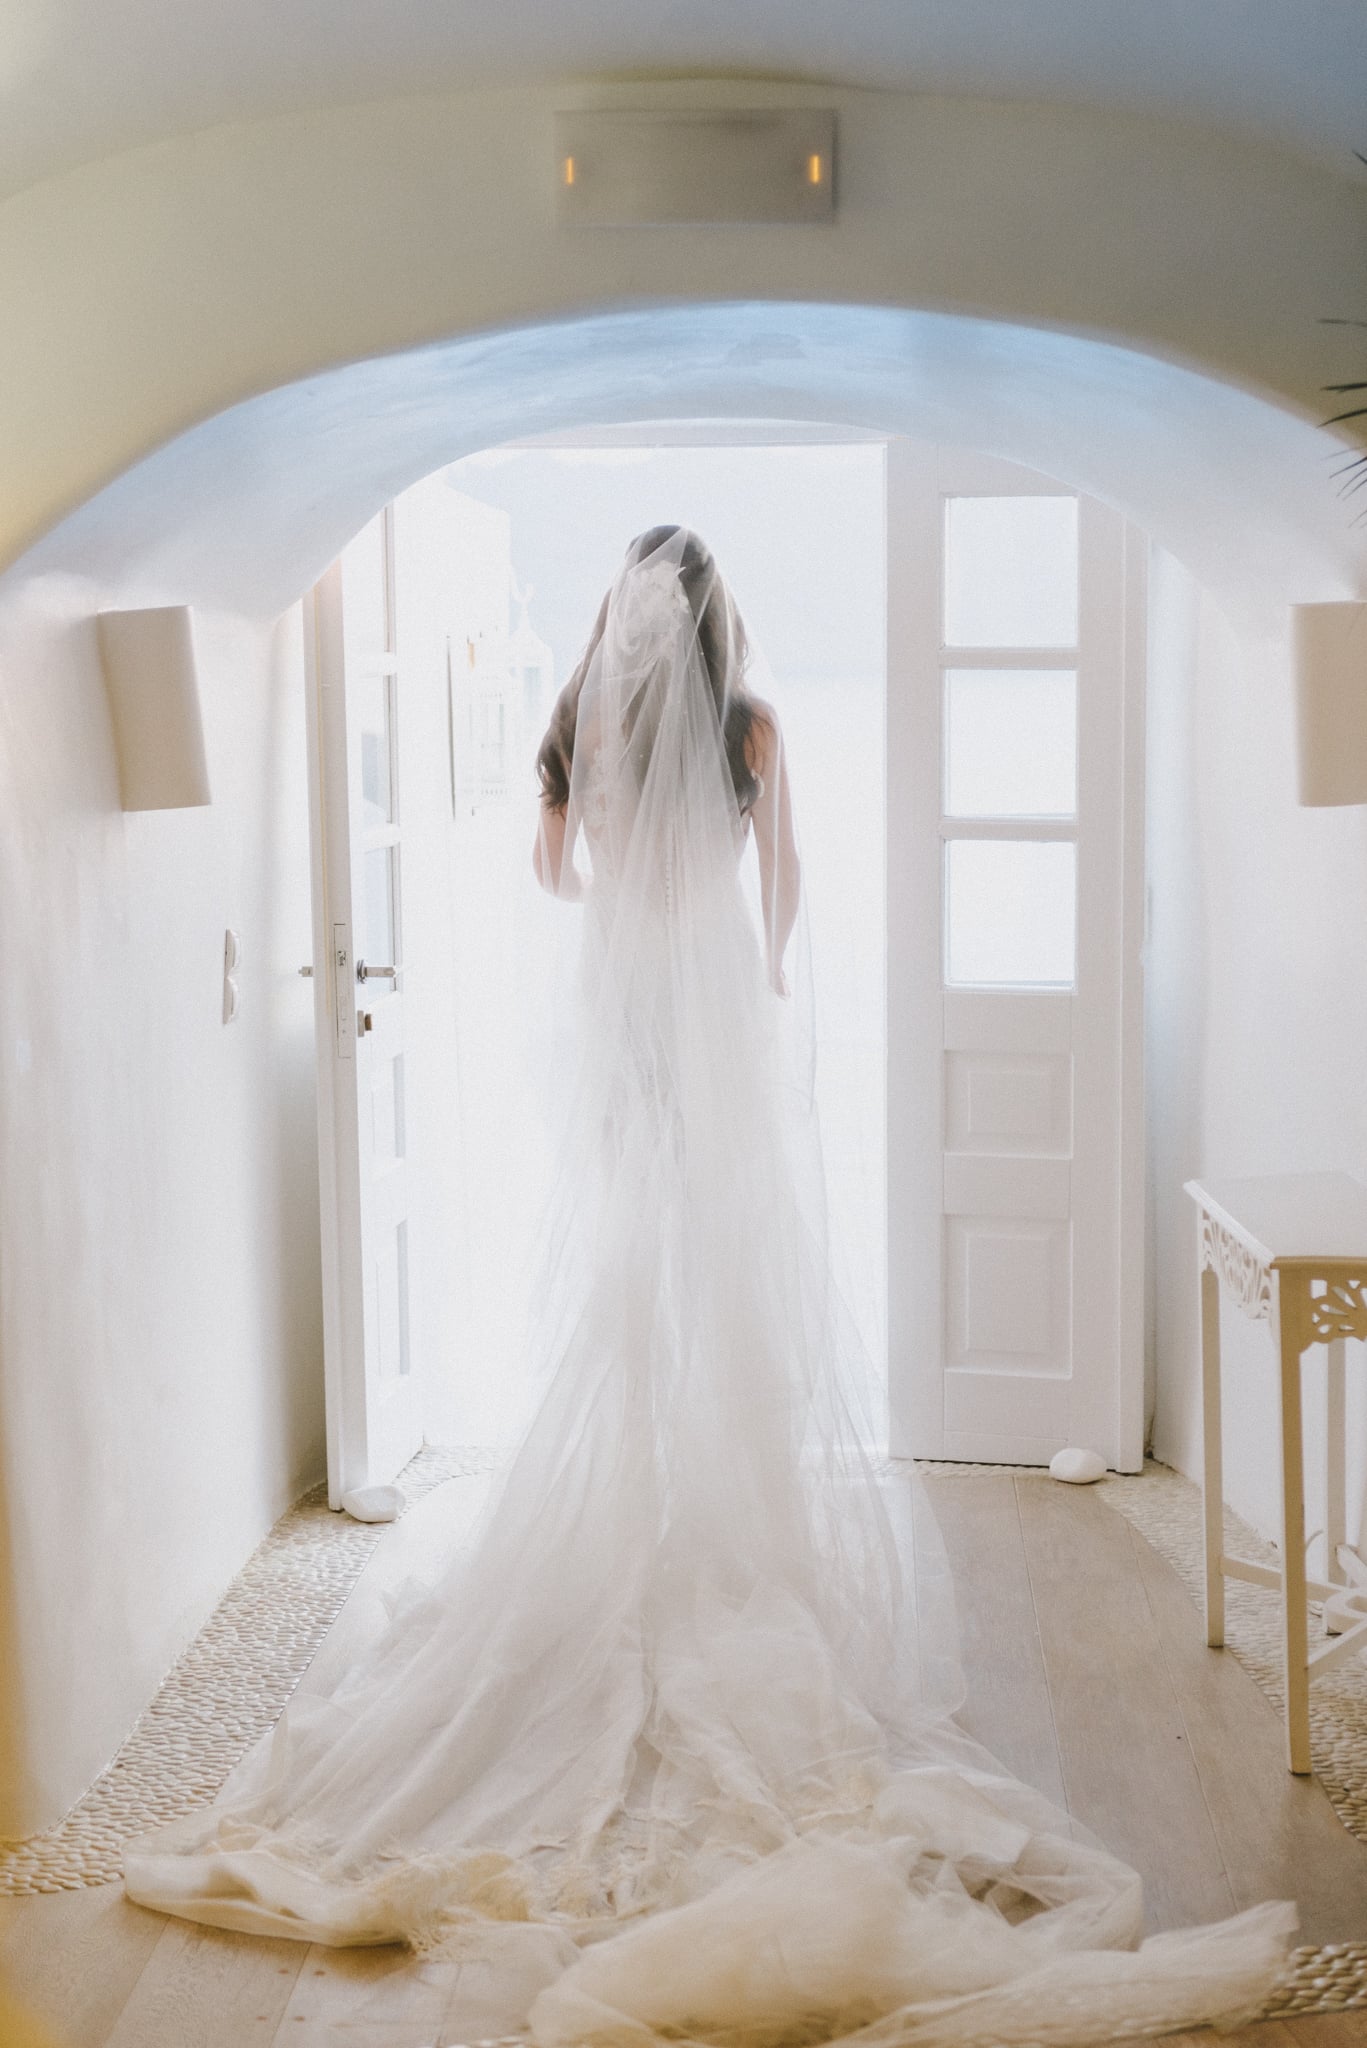 Wedding Veils: 3 steps to finding your perfect match